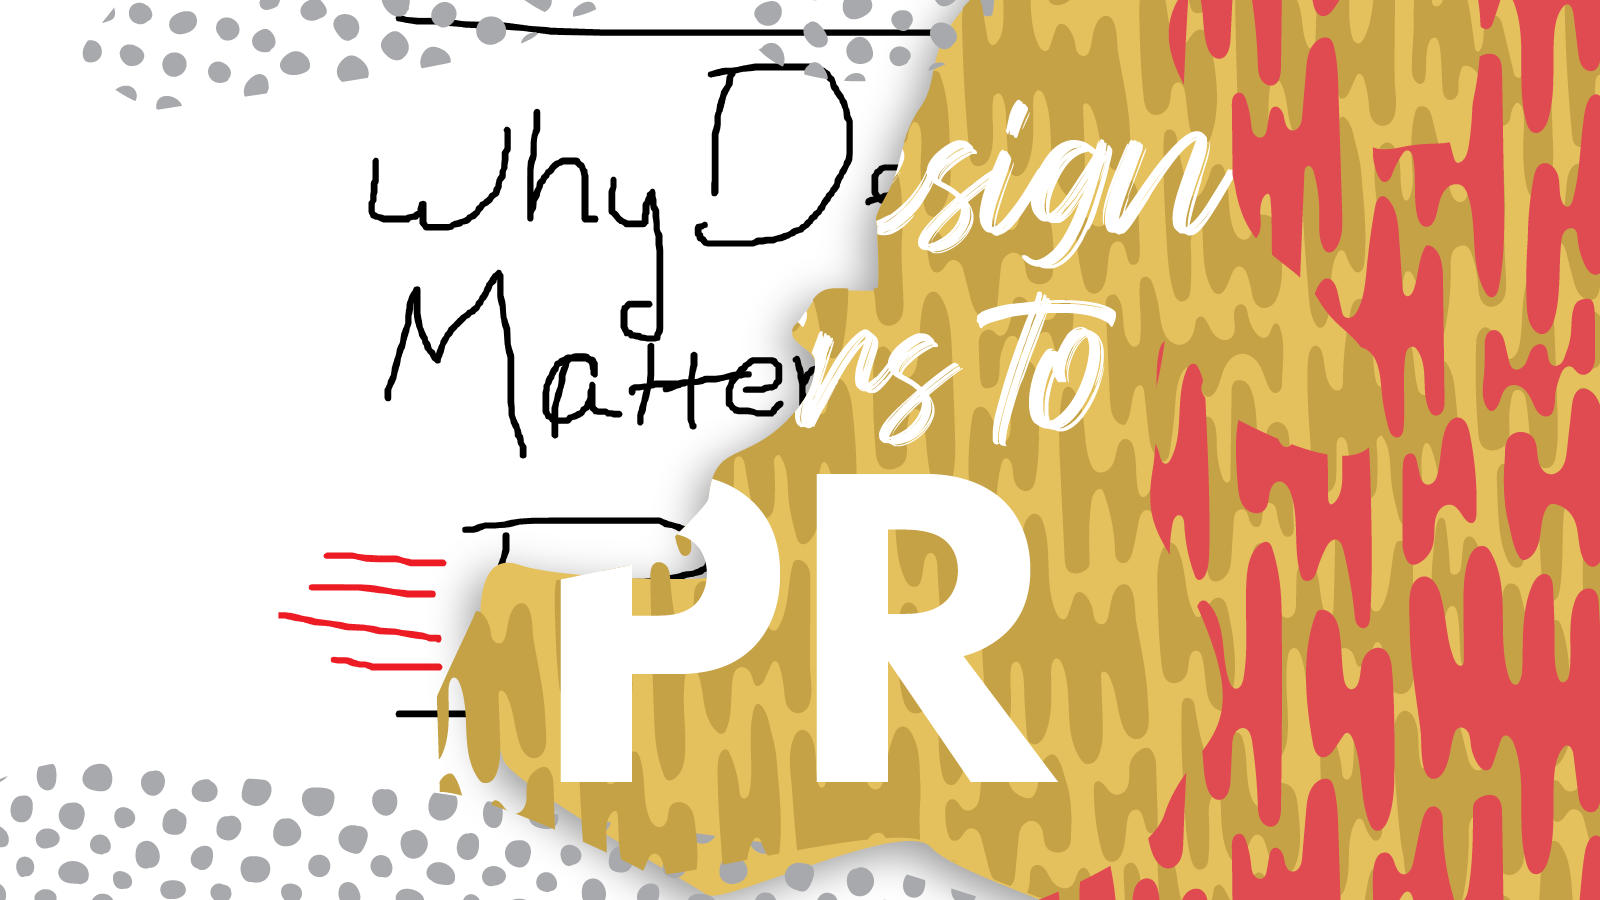 Text reads "Why Design Matters to PR"